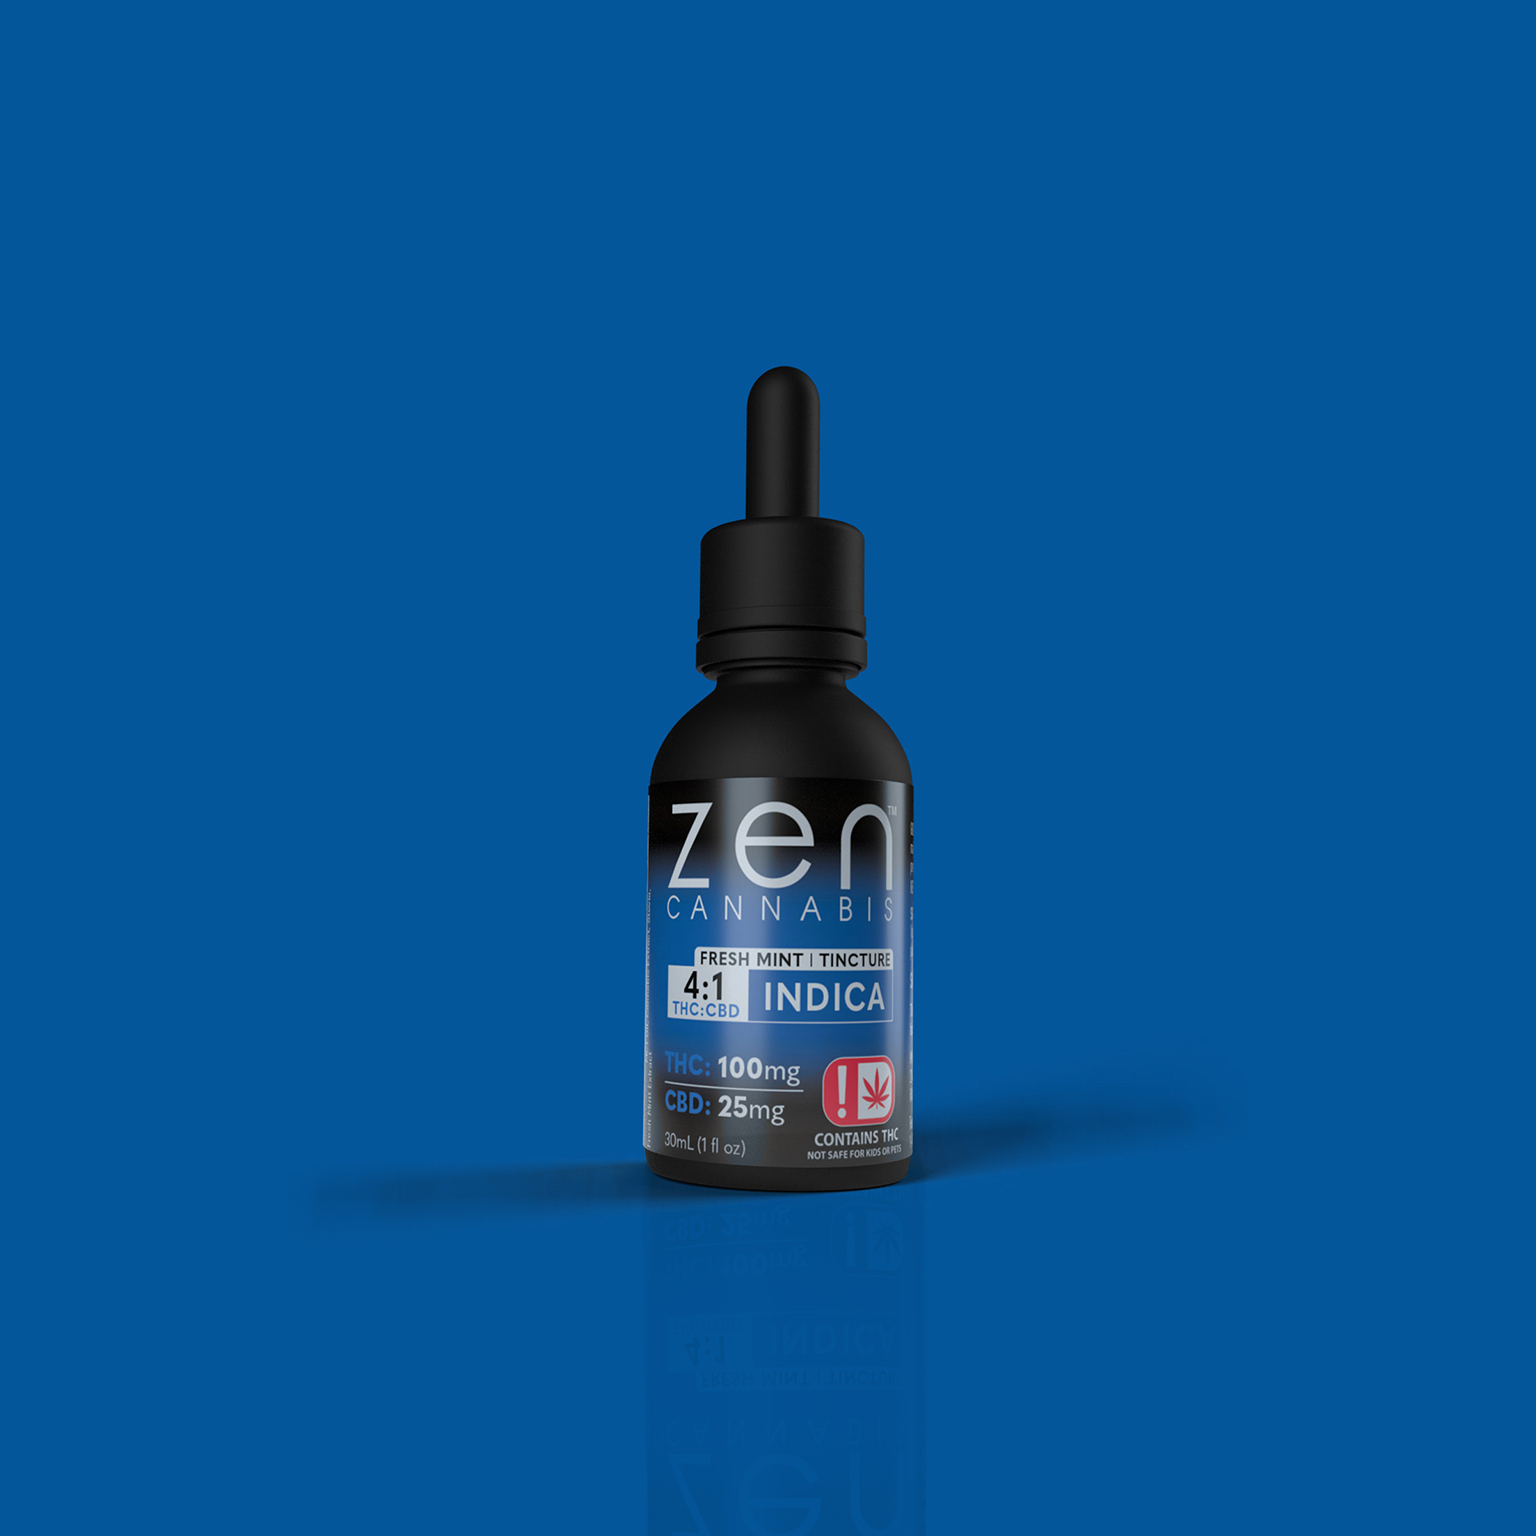 Cannabis Tinctures A Discreet and Convenient Way to Consume Cannabis